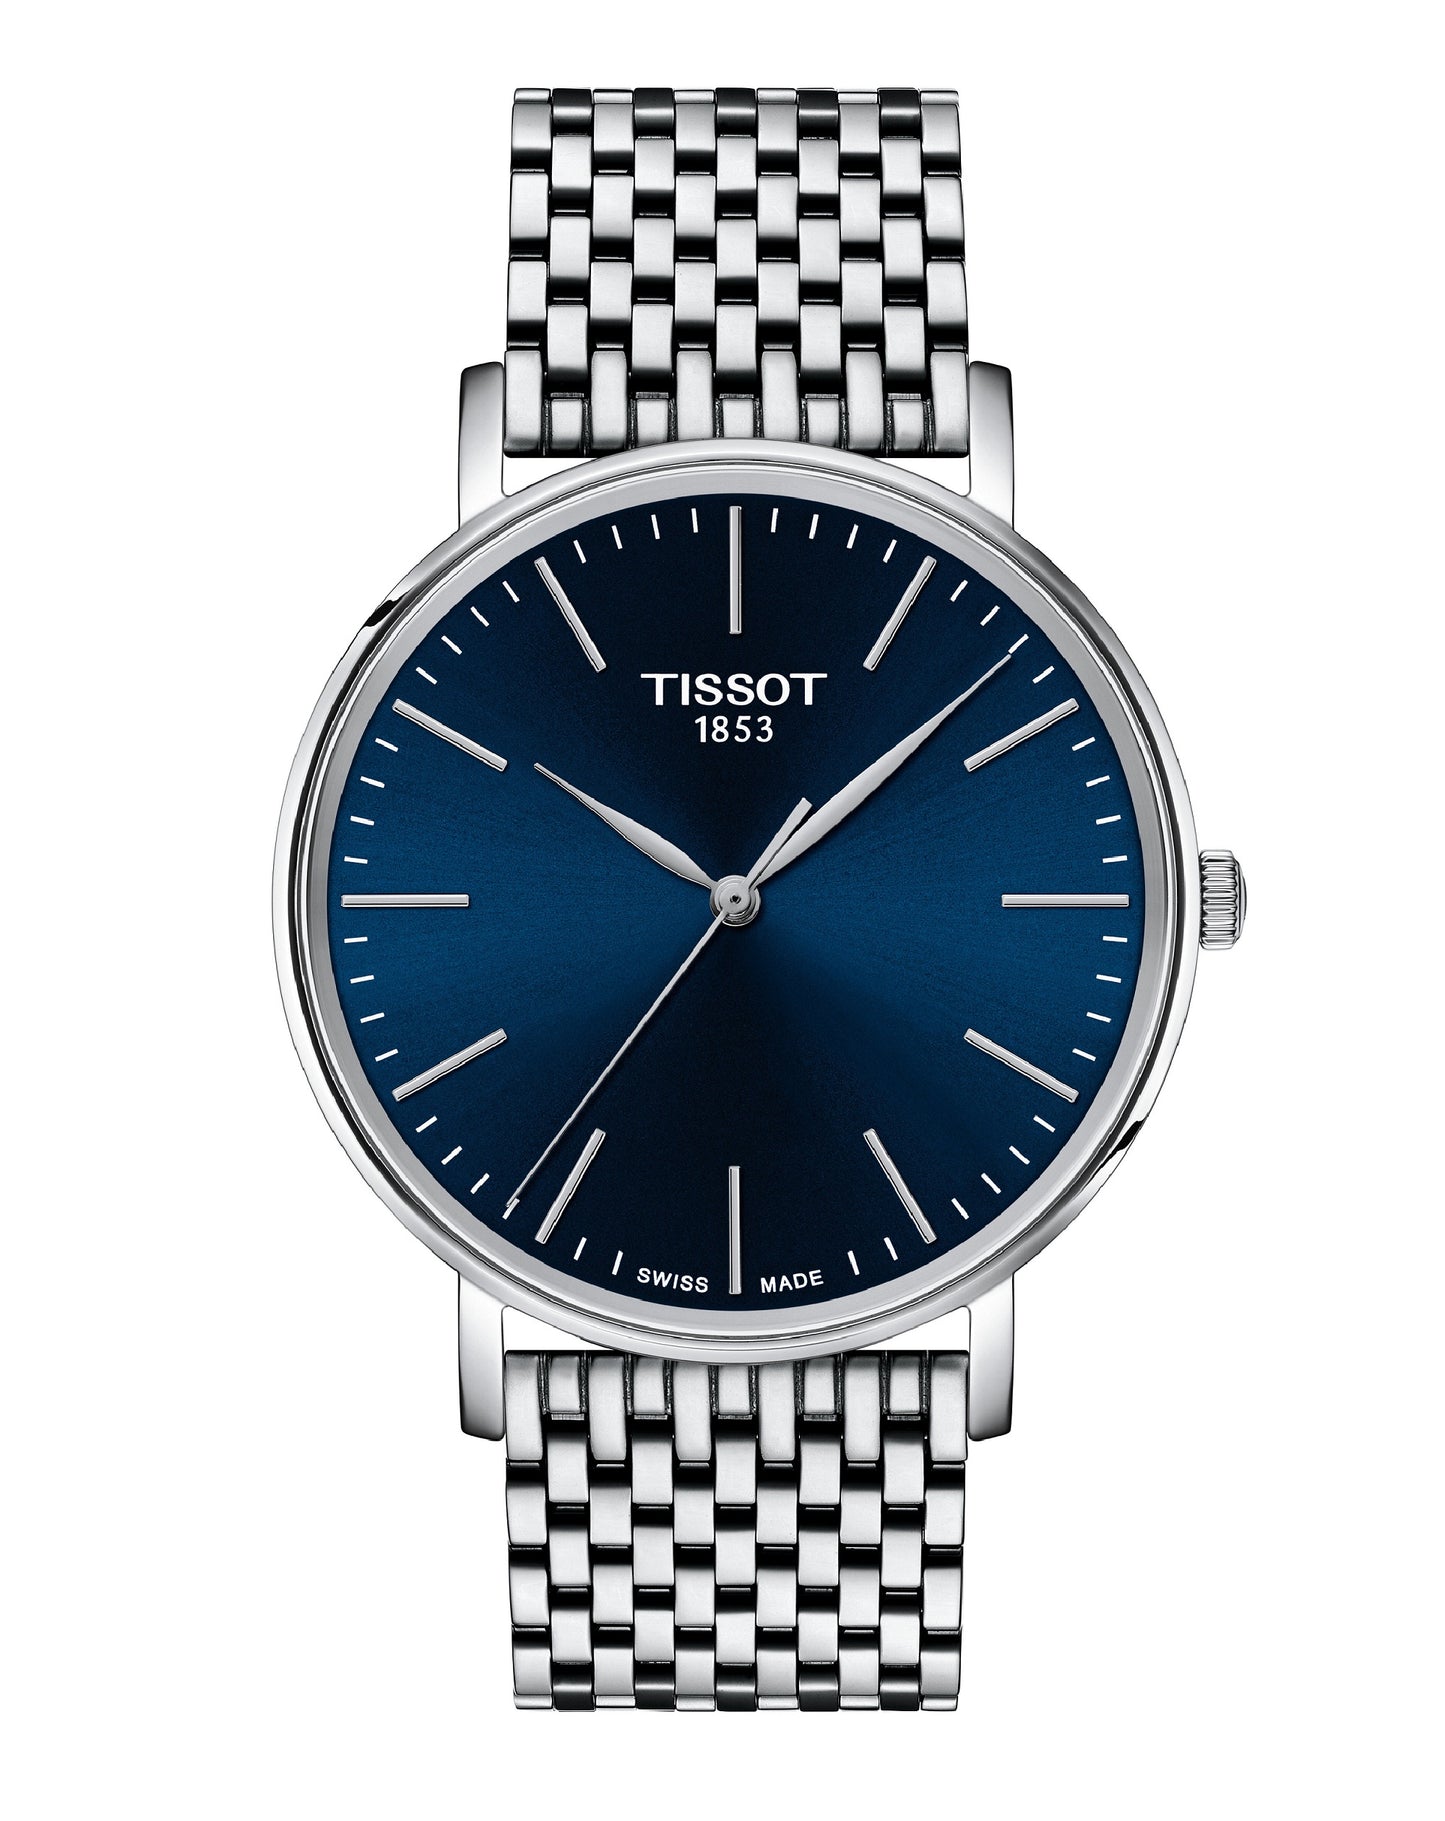 Tissot T143.410.11.041.00 Tissot EVERYTIME BLUE Dial Watch